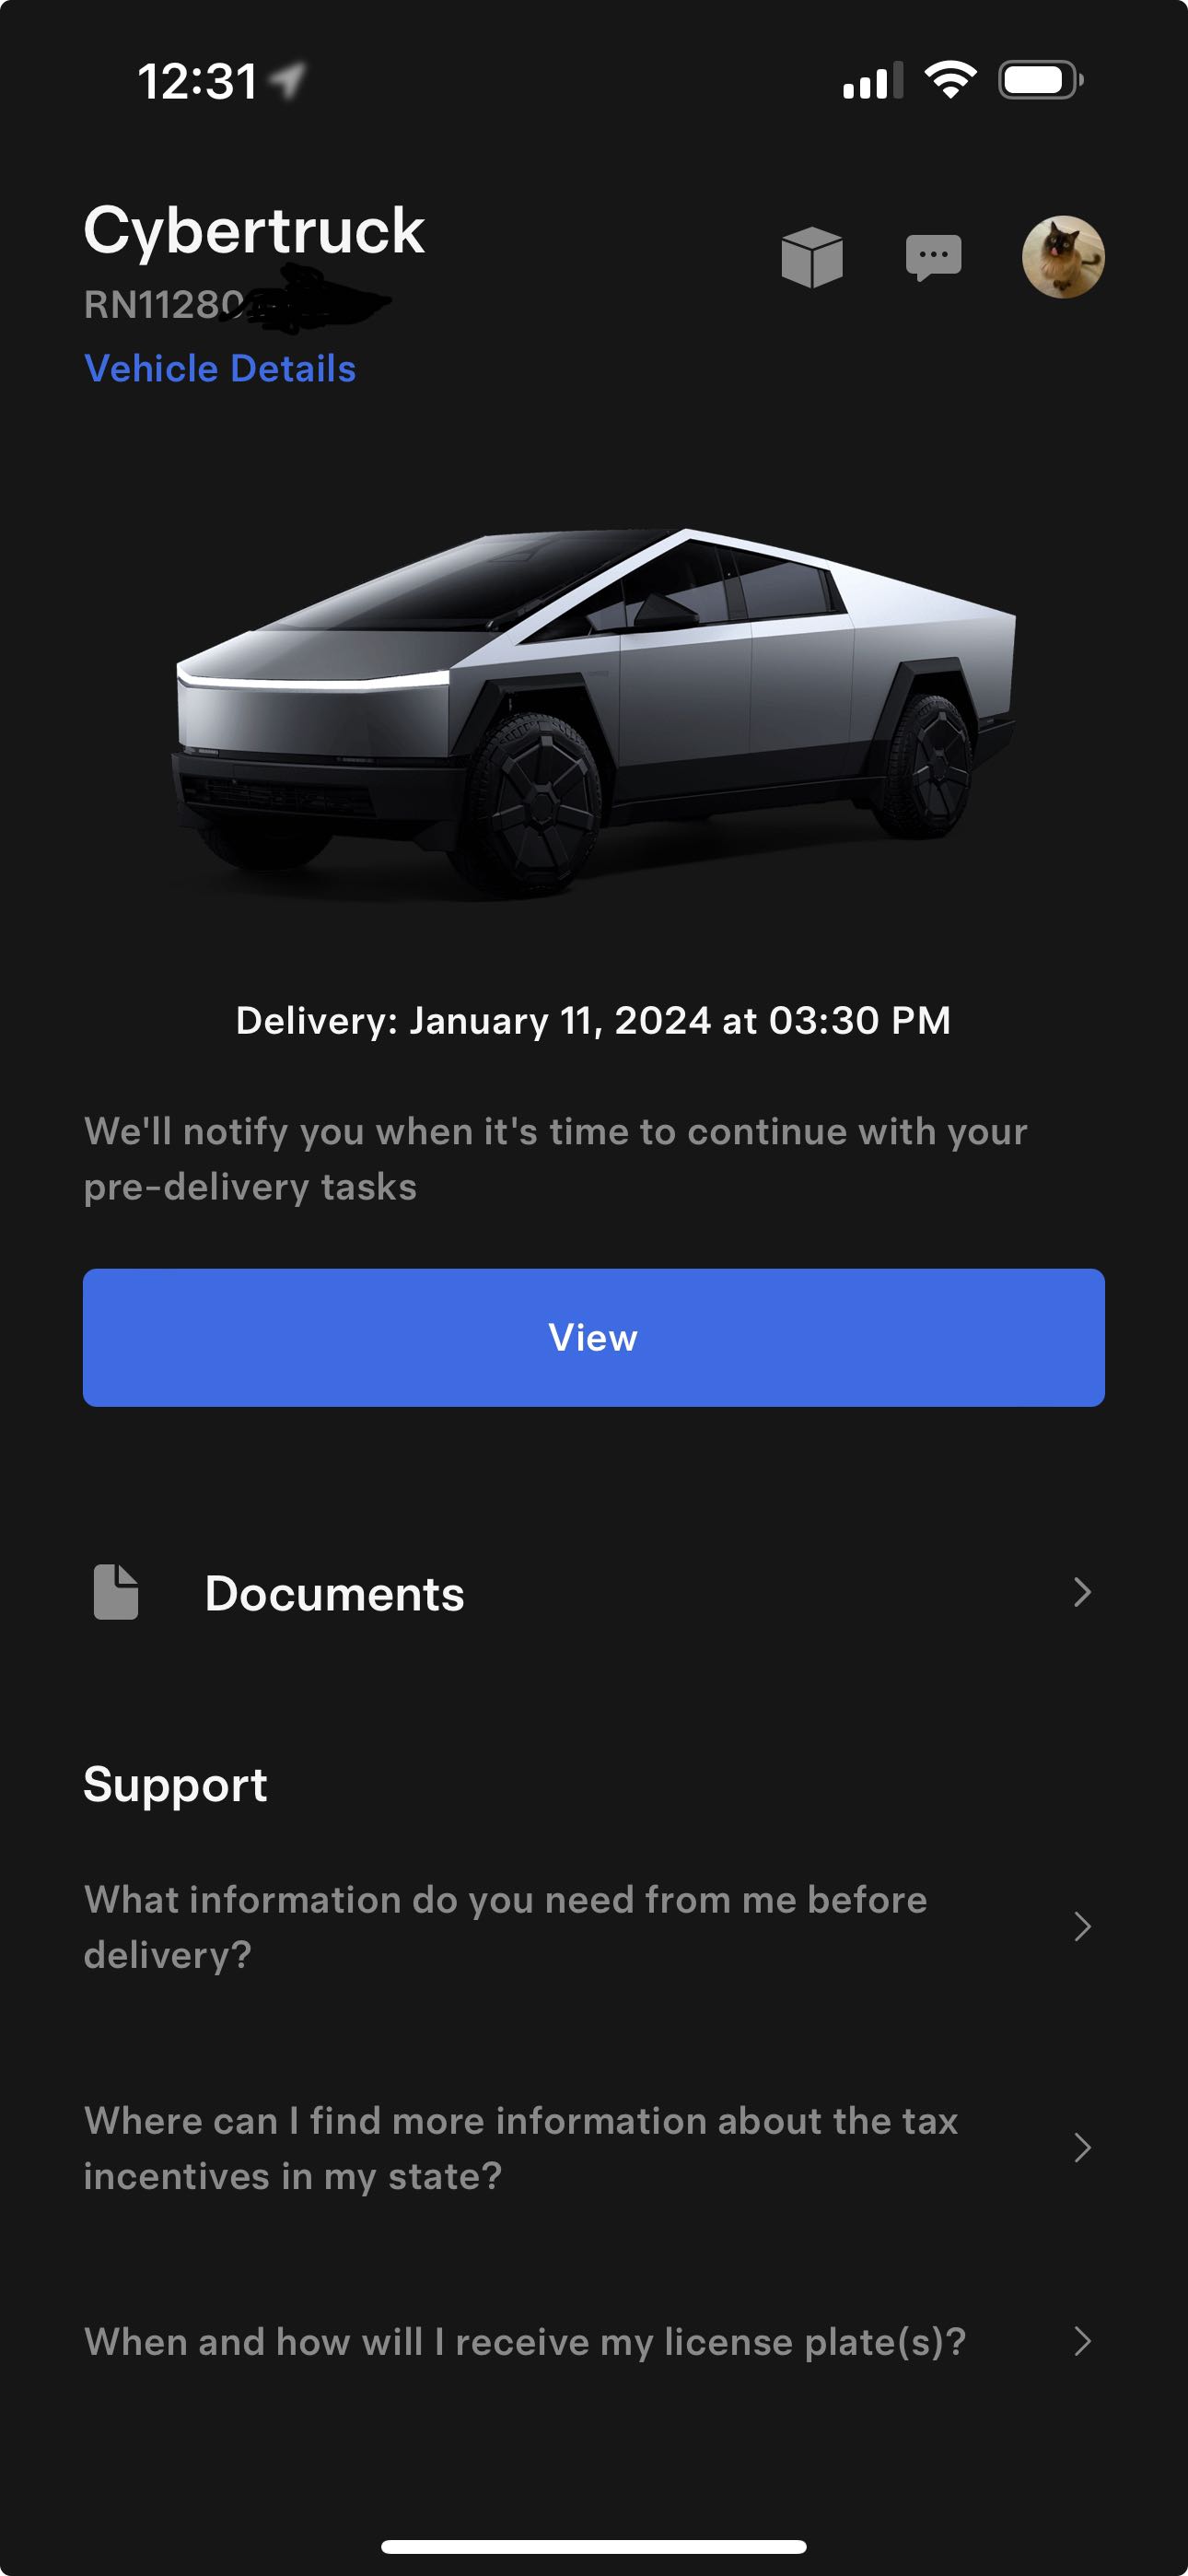 Tesla Cybertruck My Cybertruck is Delivered Today January 11!! (non-employee) 👍 First Impressions + Photos 📸 image_20240111123328-